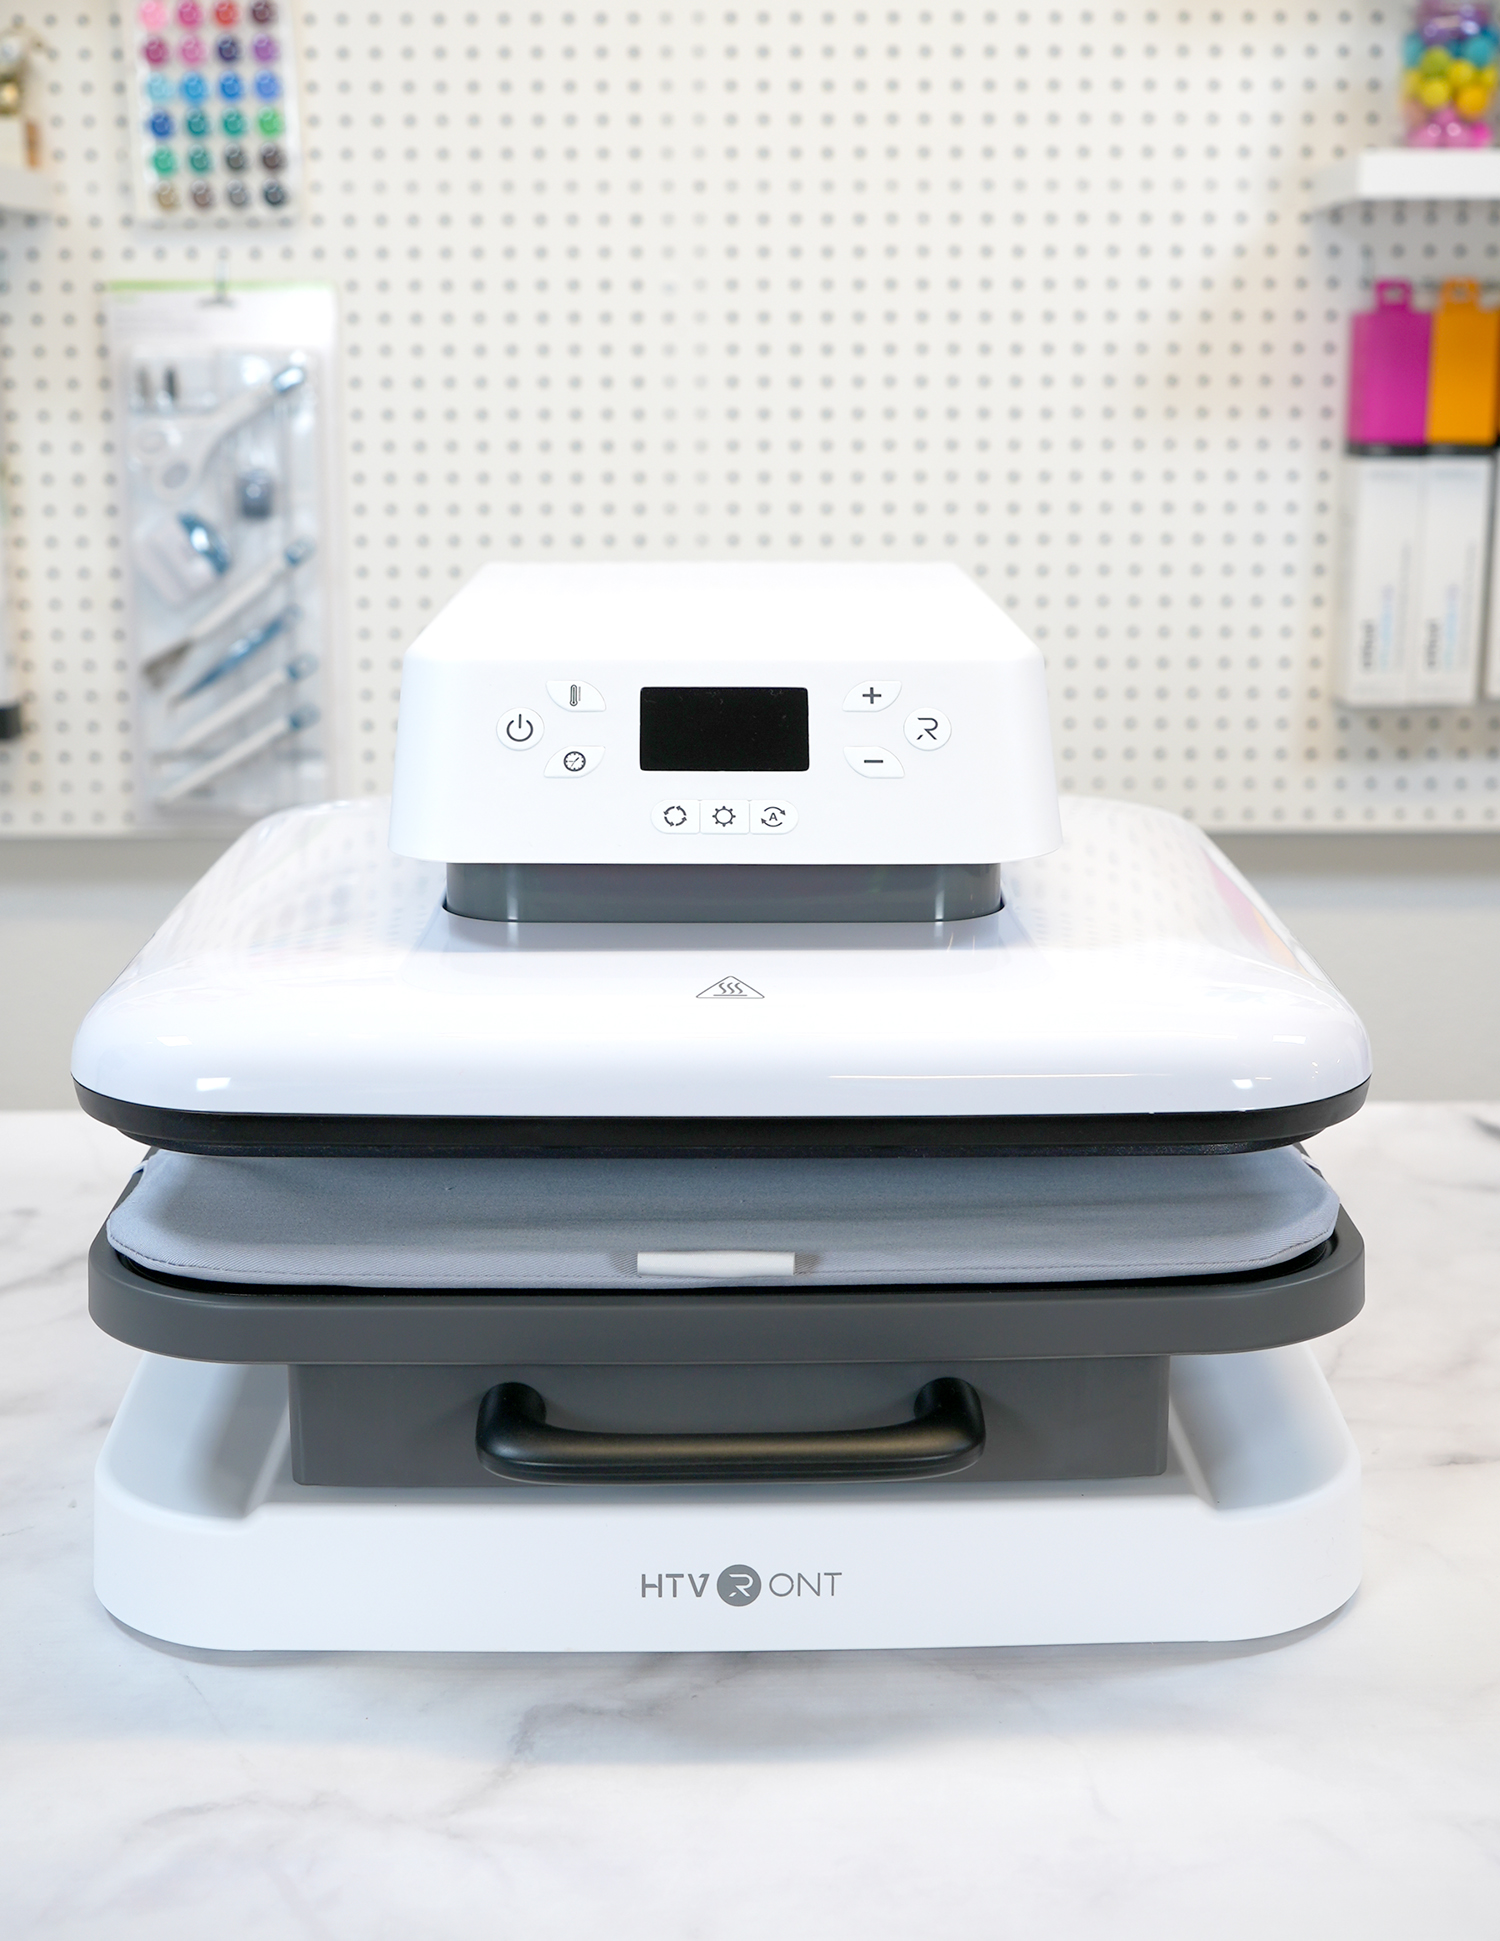 HTVRont AutoPress Heat Press Review and Set Up - Daily Dose of DIY